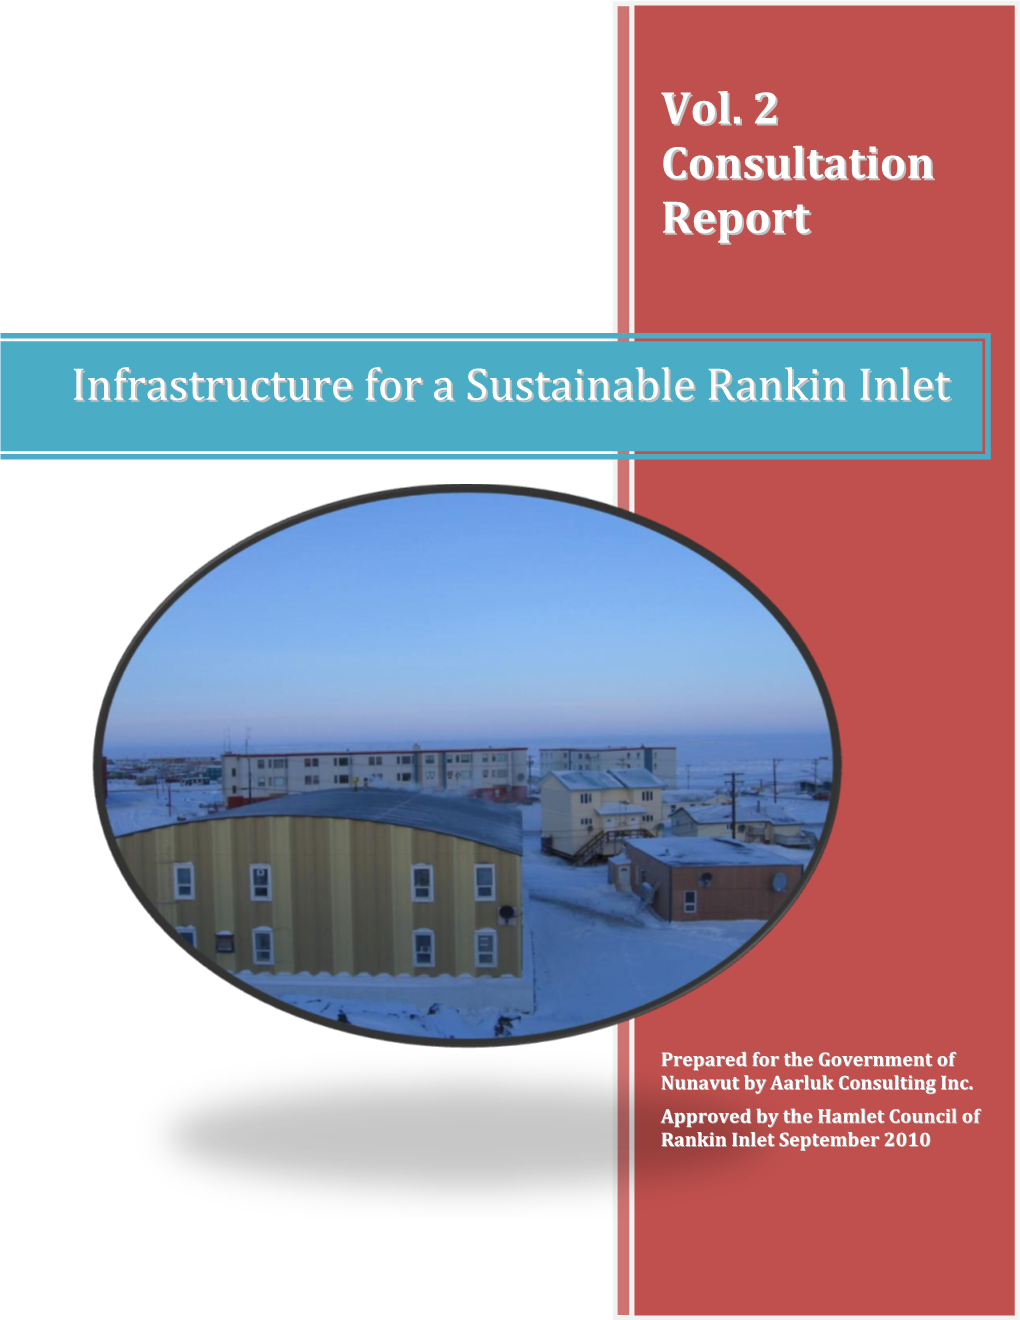 Infrastructure for a Sustainable Rankin Inlet Vol. 2 Consultation Report